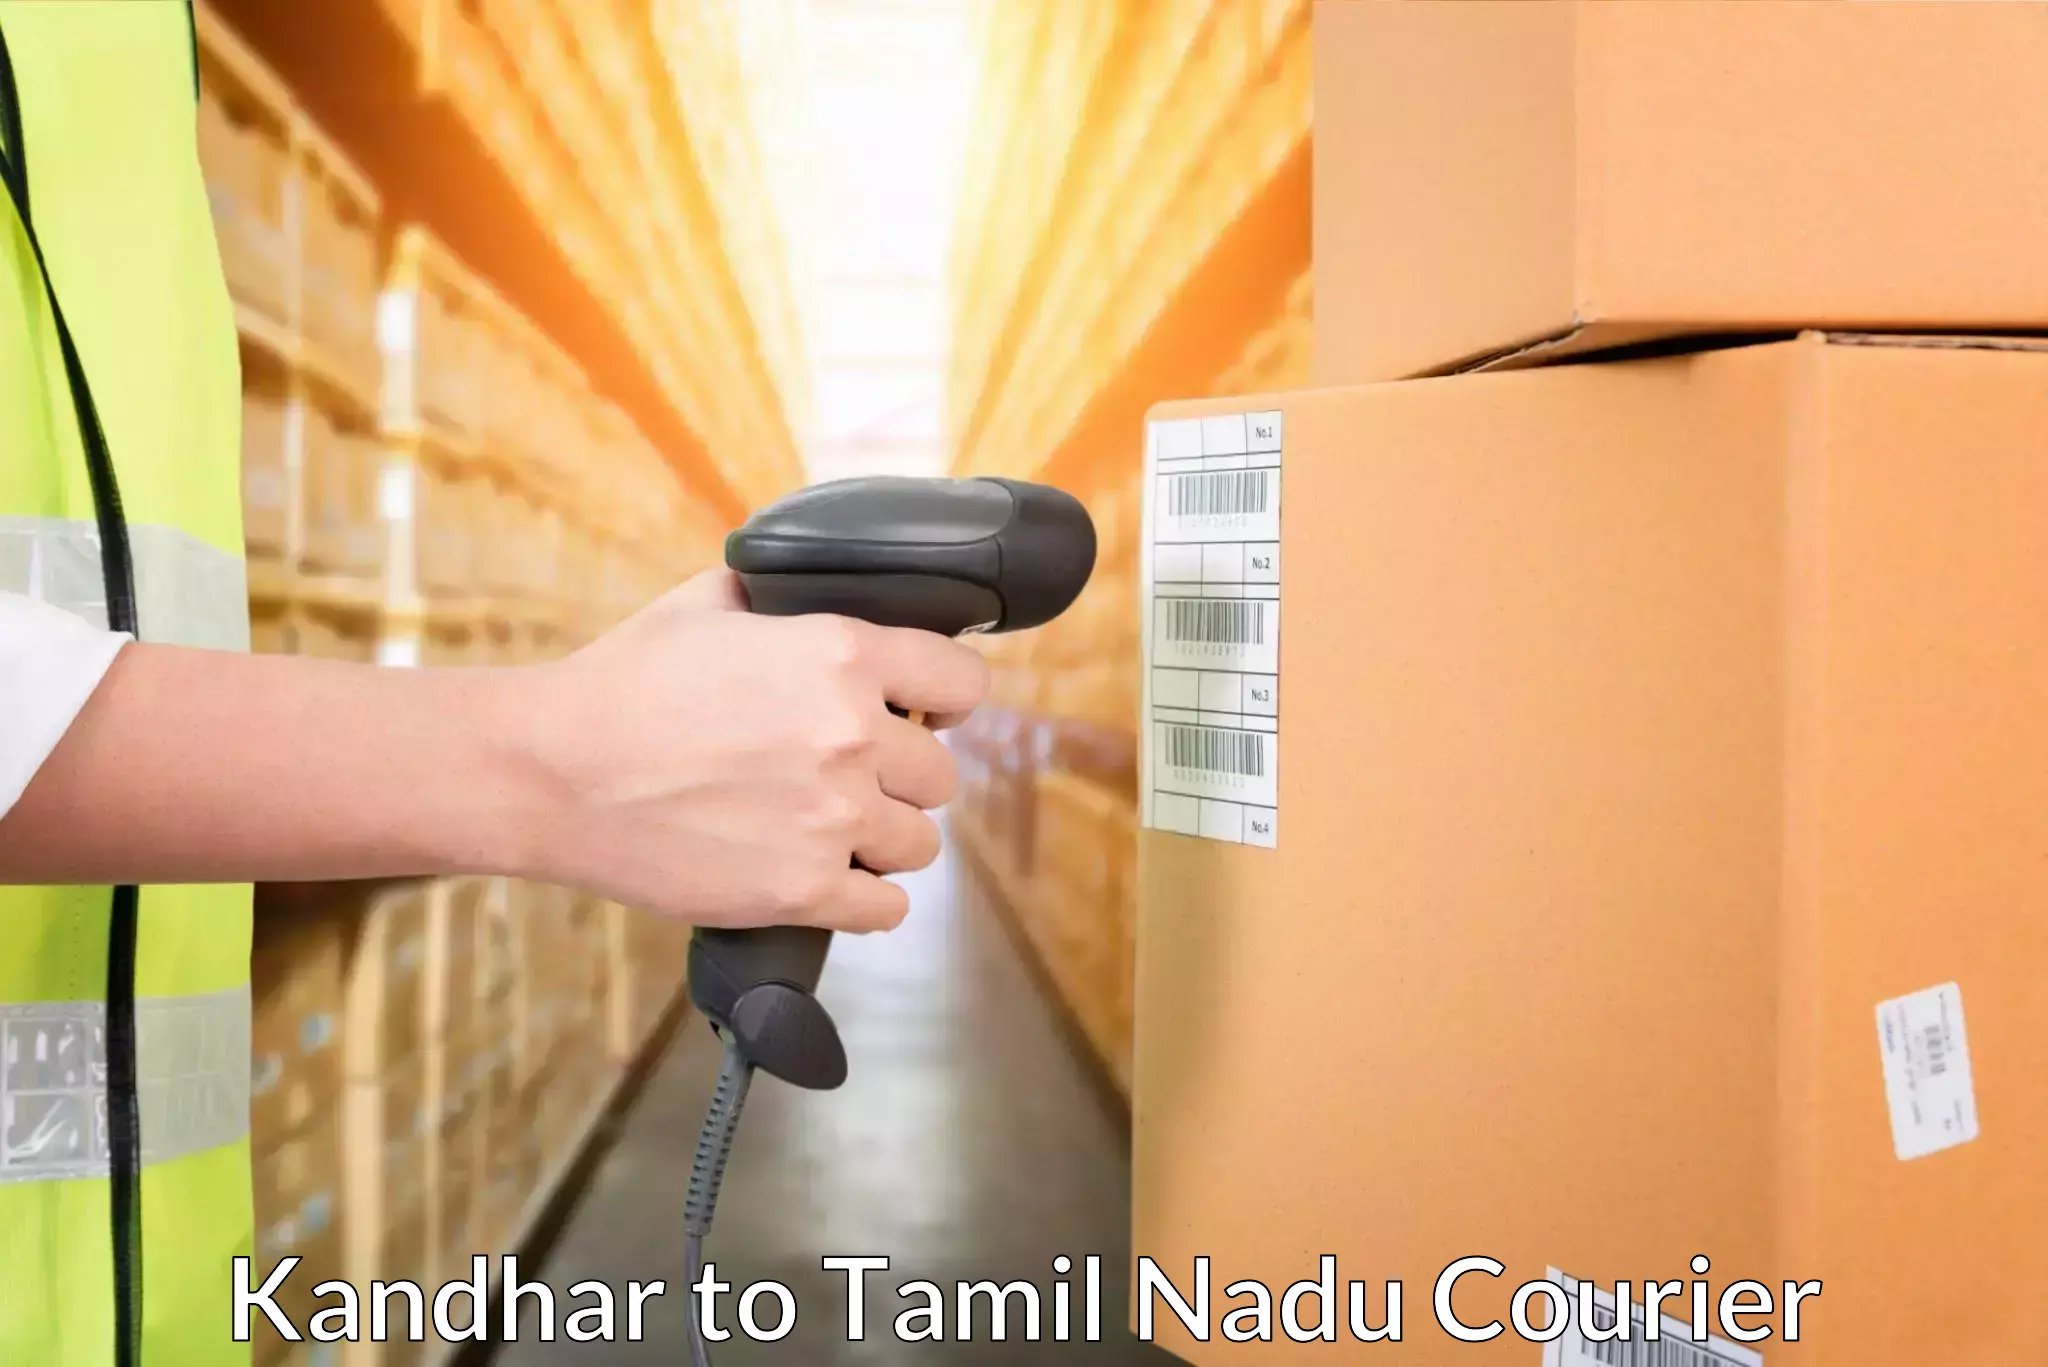 Large-scale shipping solutions Kandhar to Chennai Port